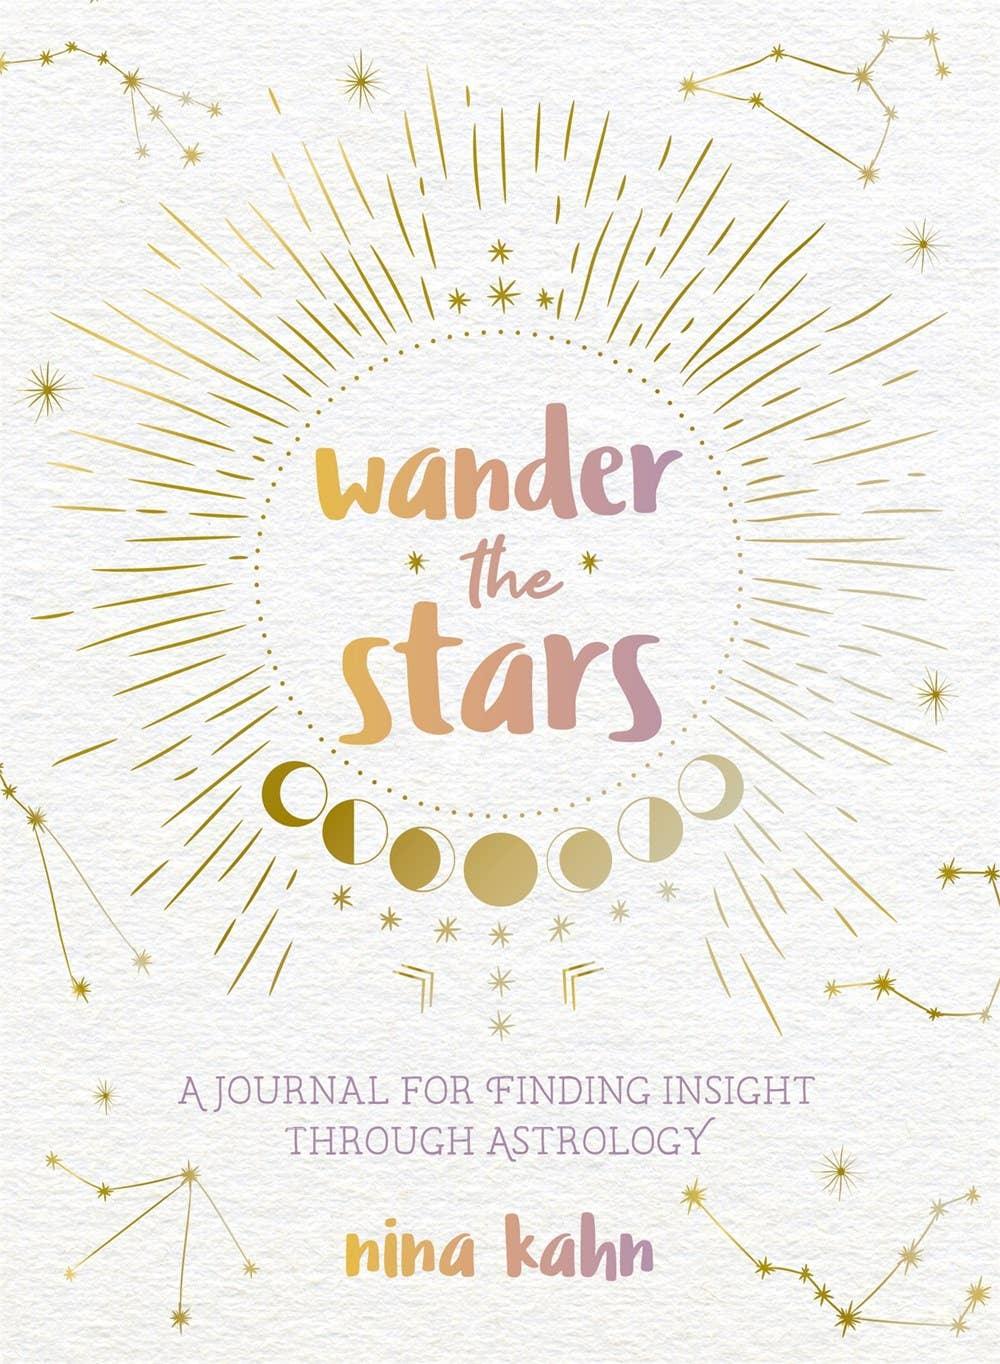 Wander the Stars: Finding Insight Through Astrology Journal - Esme and Elodie